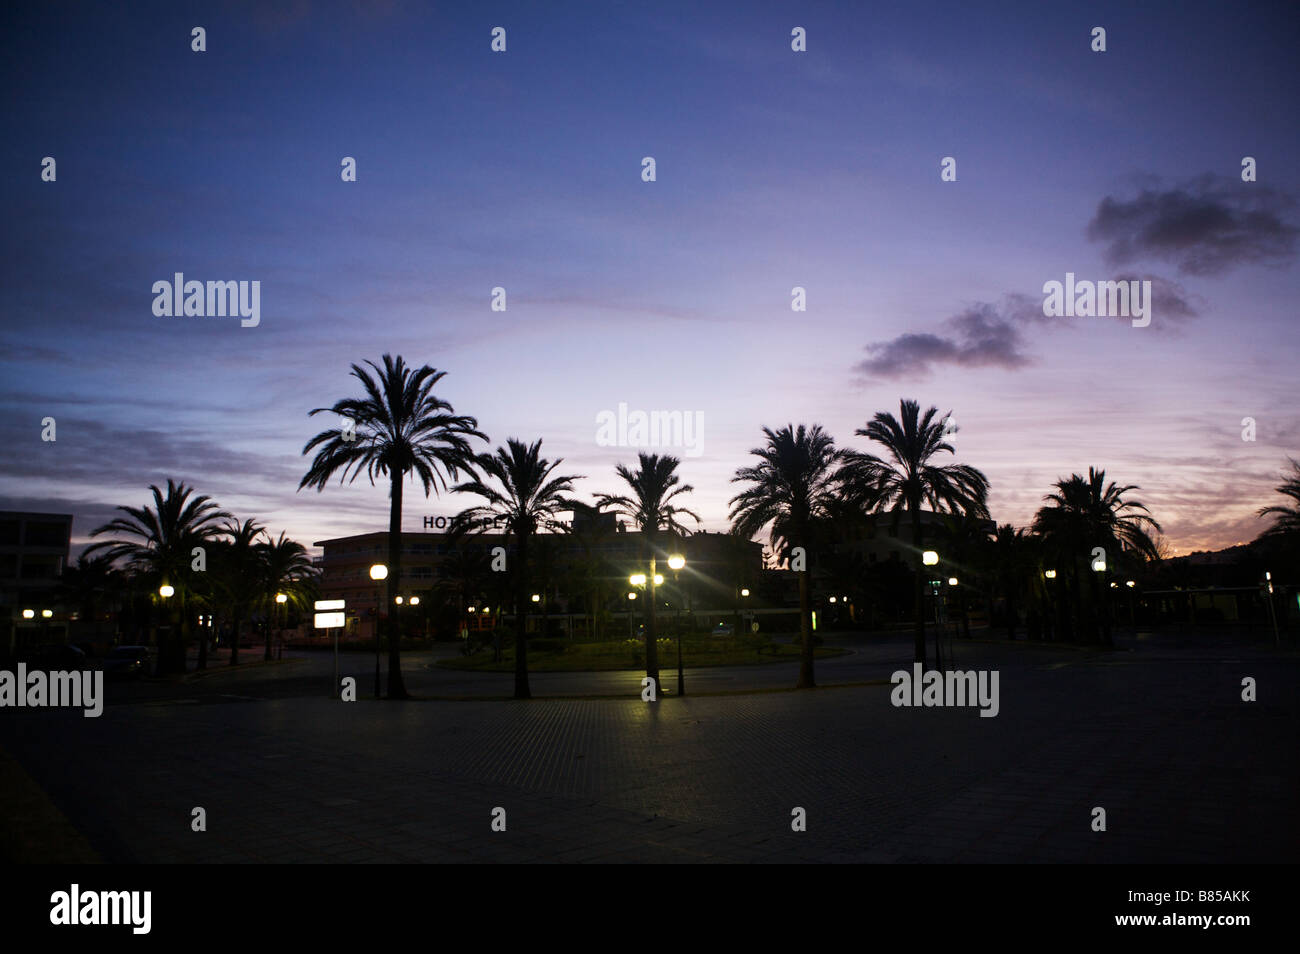 Palm trees outside a hotel in Mallorca sihouetted in the early dawn sunrise Stock Photo